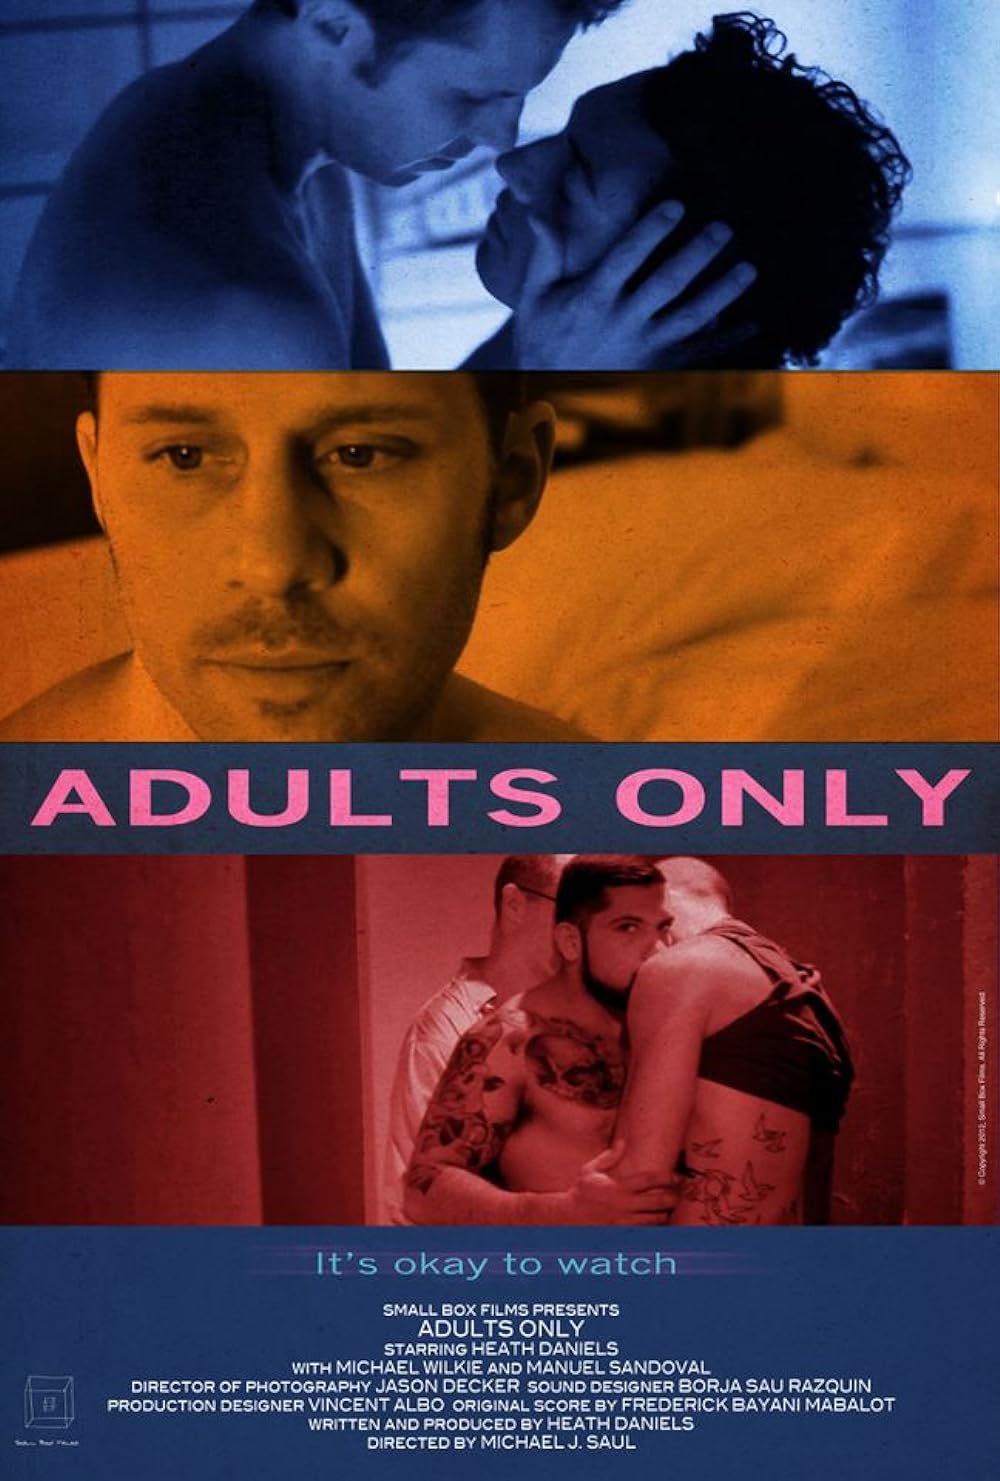 bryan banda recommends english adults only movie pic